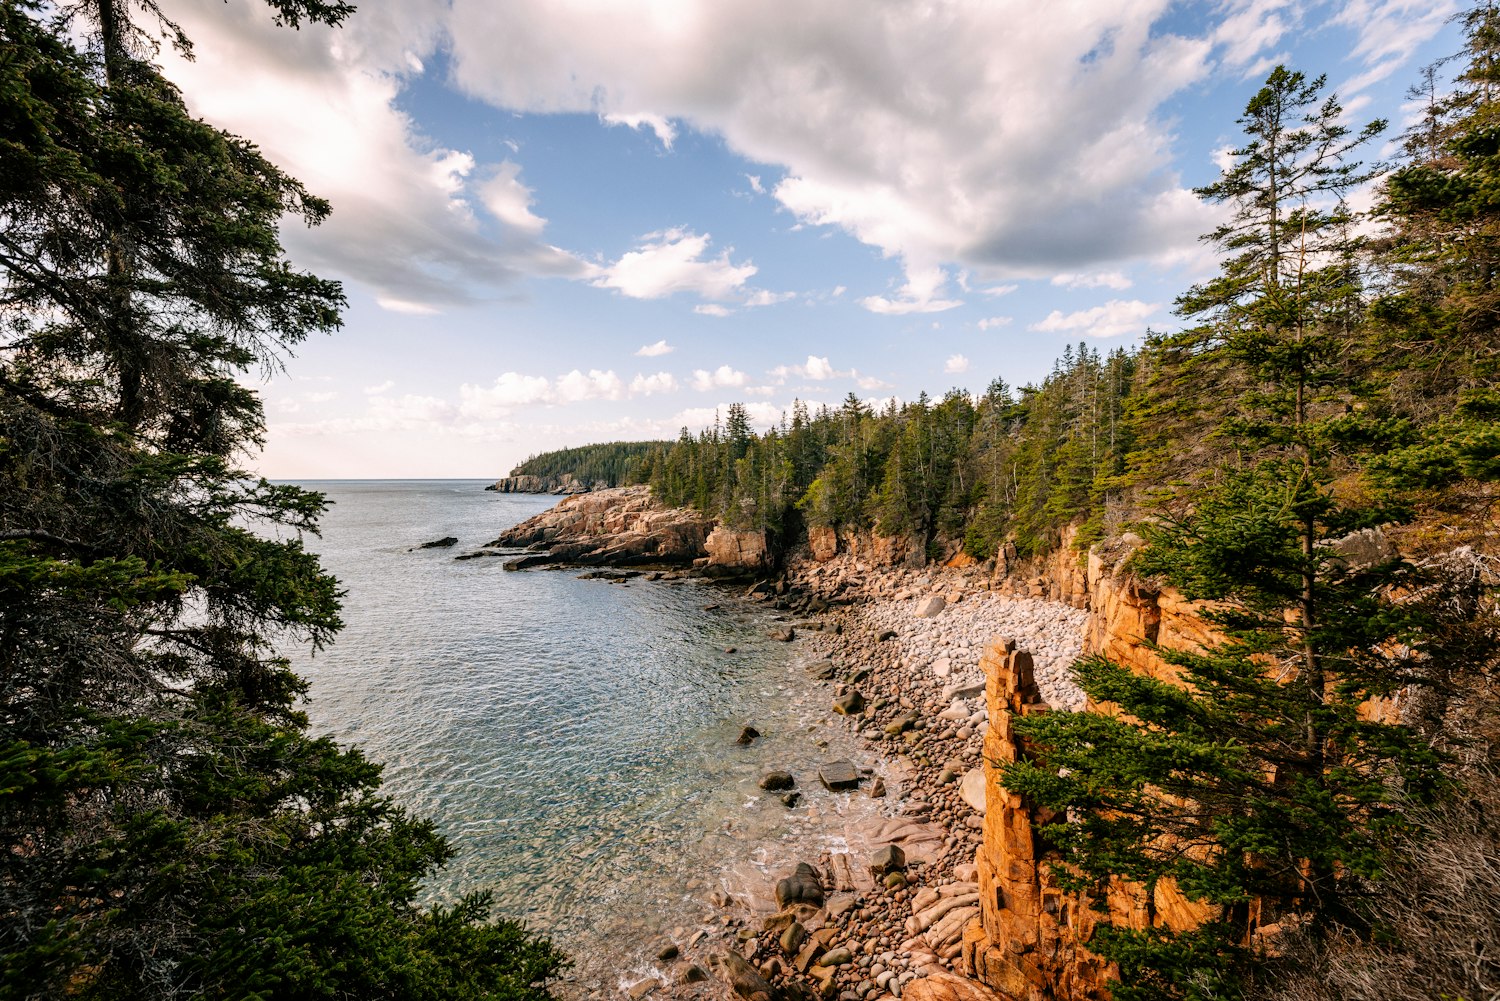 Summer in Acadia National Park in Maine